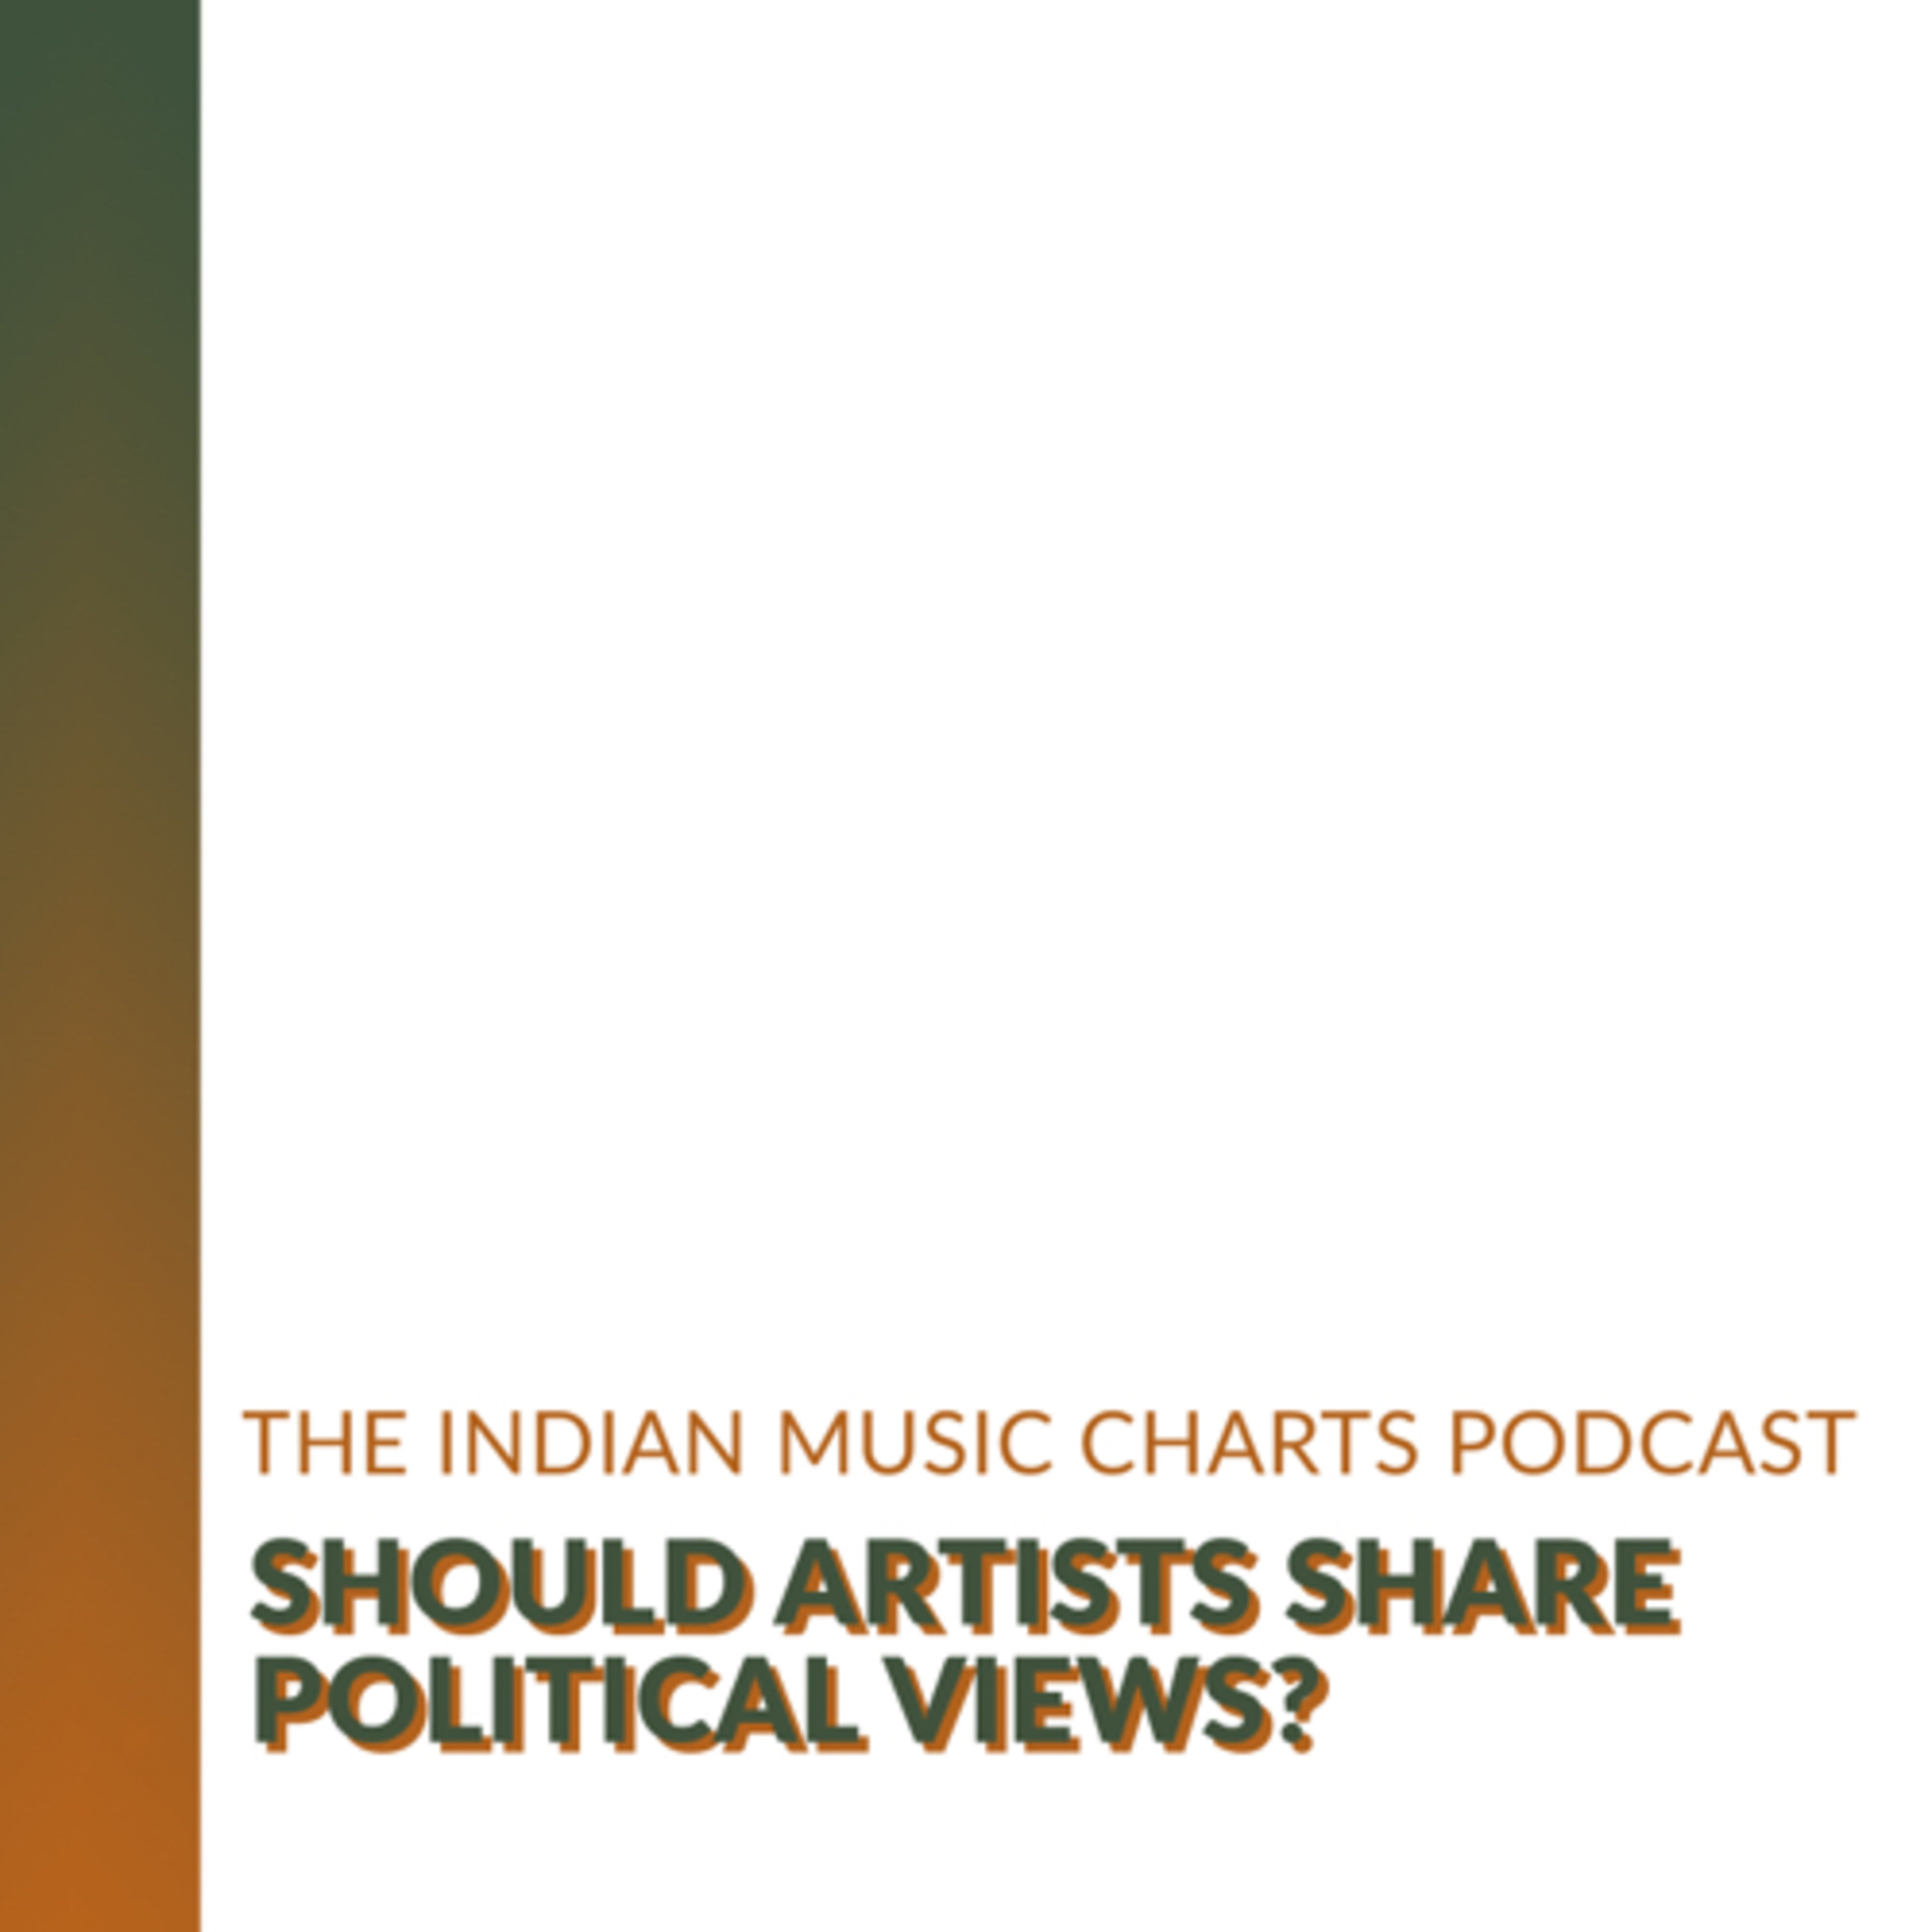 Should artists share political views?